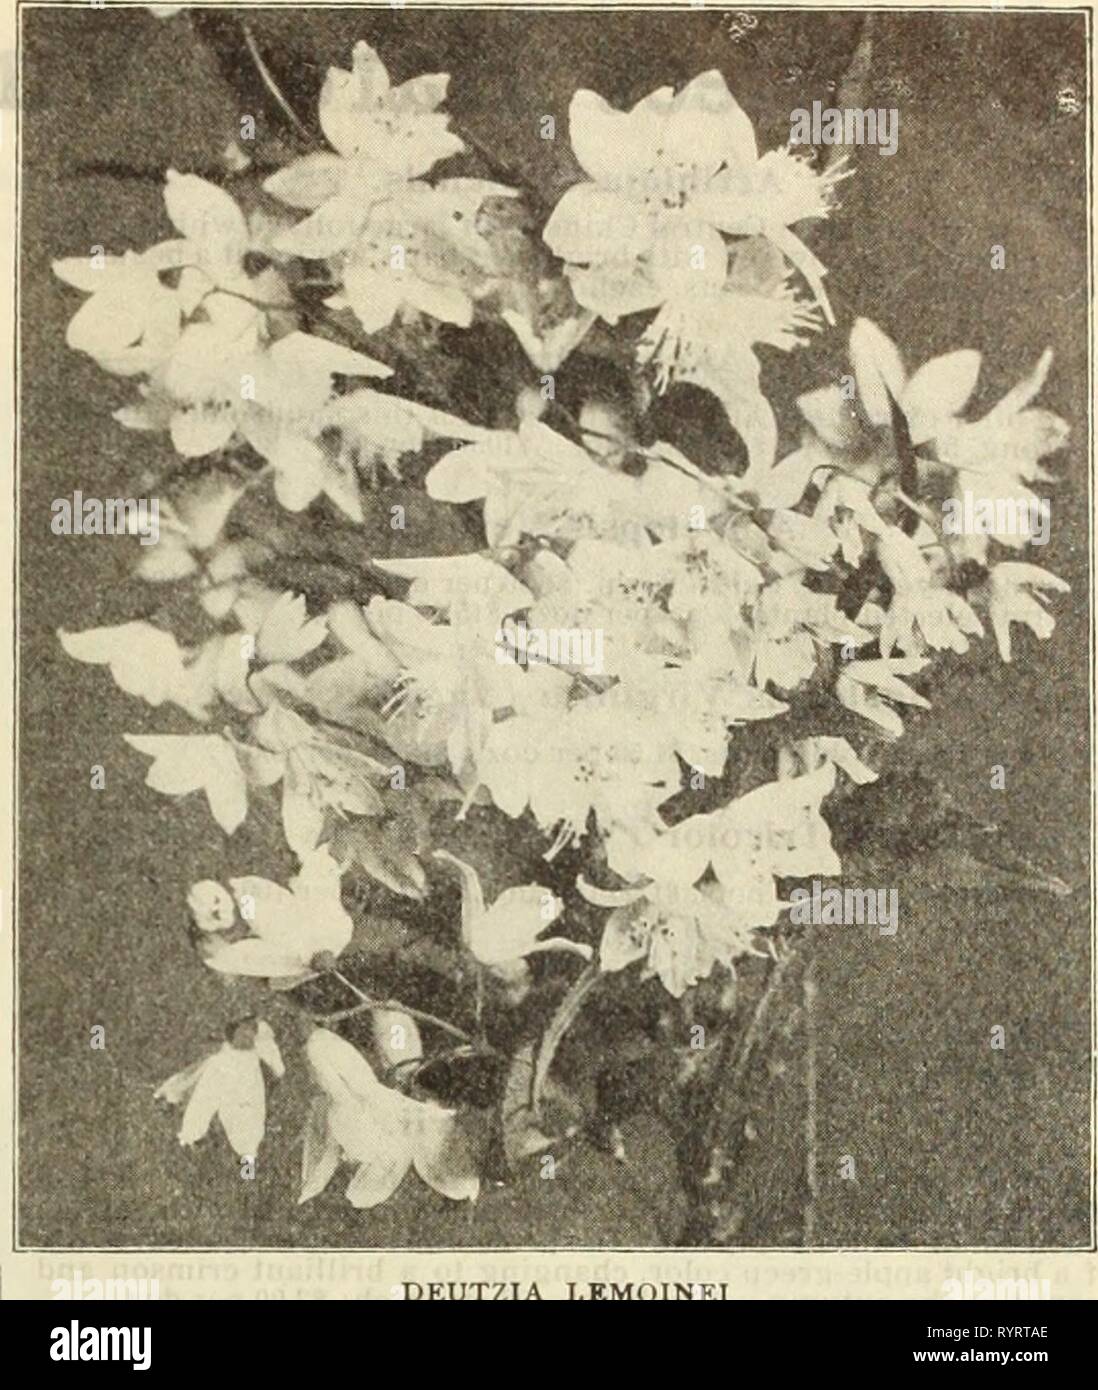 Dreer's wholesale price list  Dreer's wholesale price list : seeds, plants, bulbs, etc . dreerswholesalep1913henr 1 Year: 1913  HENRY A. DREER, PHILADELPHIA* PA., WHOLESALE PRICE LIST 55 Rhododendron Punctatum. A distinct native species of compact spreading habit, splendid for exposed positions, being- absolutely hardy, producing masses of medium sized purplish-rose colored flowers. 75 cts each. Golden Variegated Privet. ( Li&lt;;ustrum Ovalifolium Aureum.) A fine lot of bushy plants of this useful, ornamental, golden variegated shrub, 18 to 24 inches high. $2.00 per doz.: $15.00 per 100. New  Stock Photo